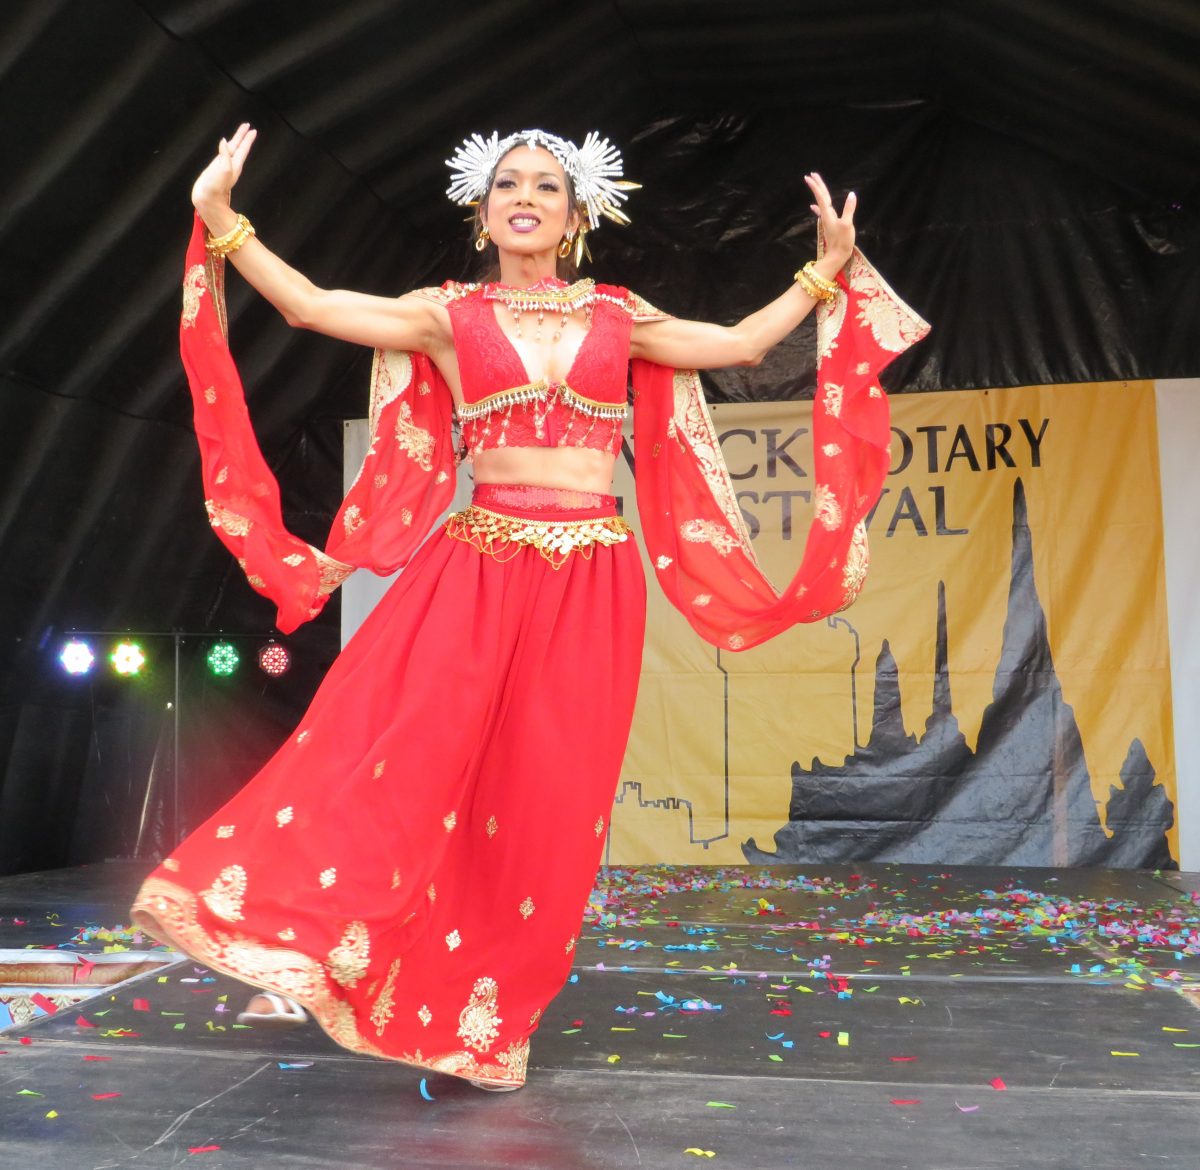 The Orient comes to Warwick Racecourse for the annual Thai Festival